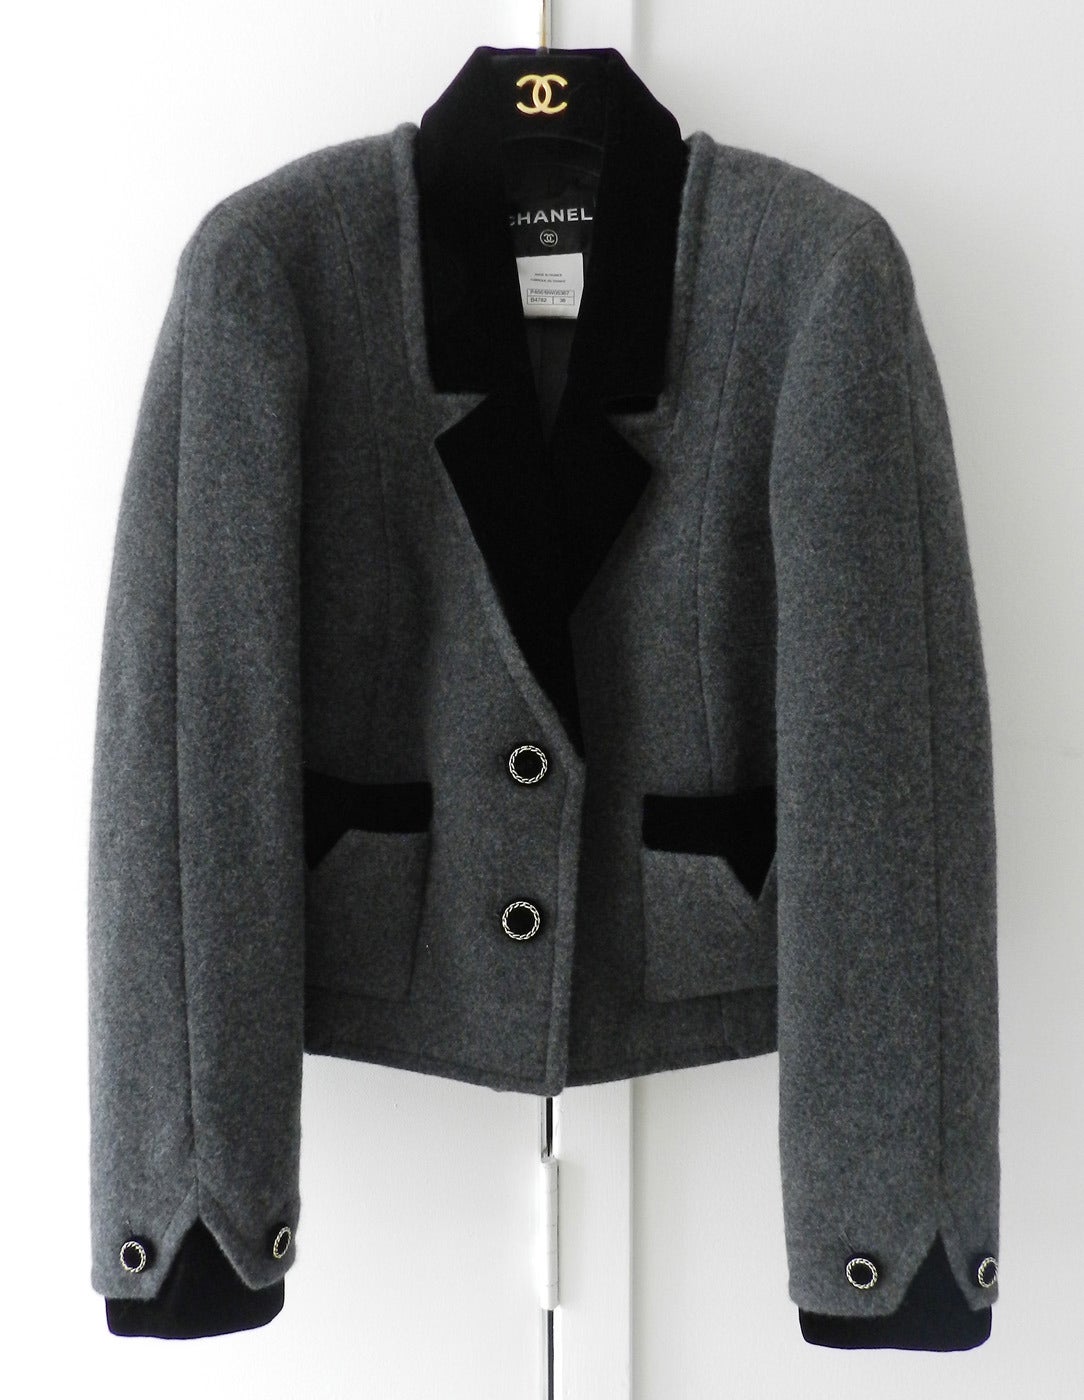 Chanel 2013 grey cashmere jacket / coat with black velvet collar and inset. Unworn condition. With tags and original price of $6650+. Size Fr 38 (USA 6).

Shipping prices provided are for trackable ground shipping to the USA. For Canada,